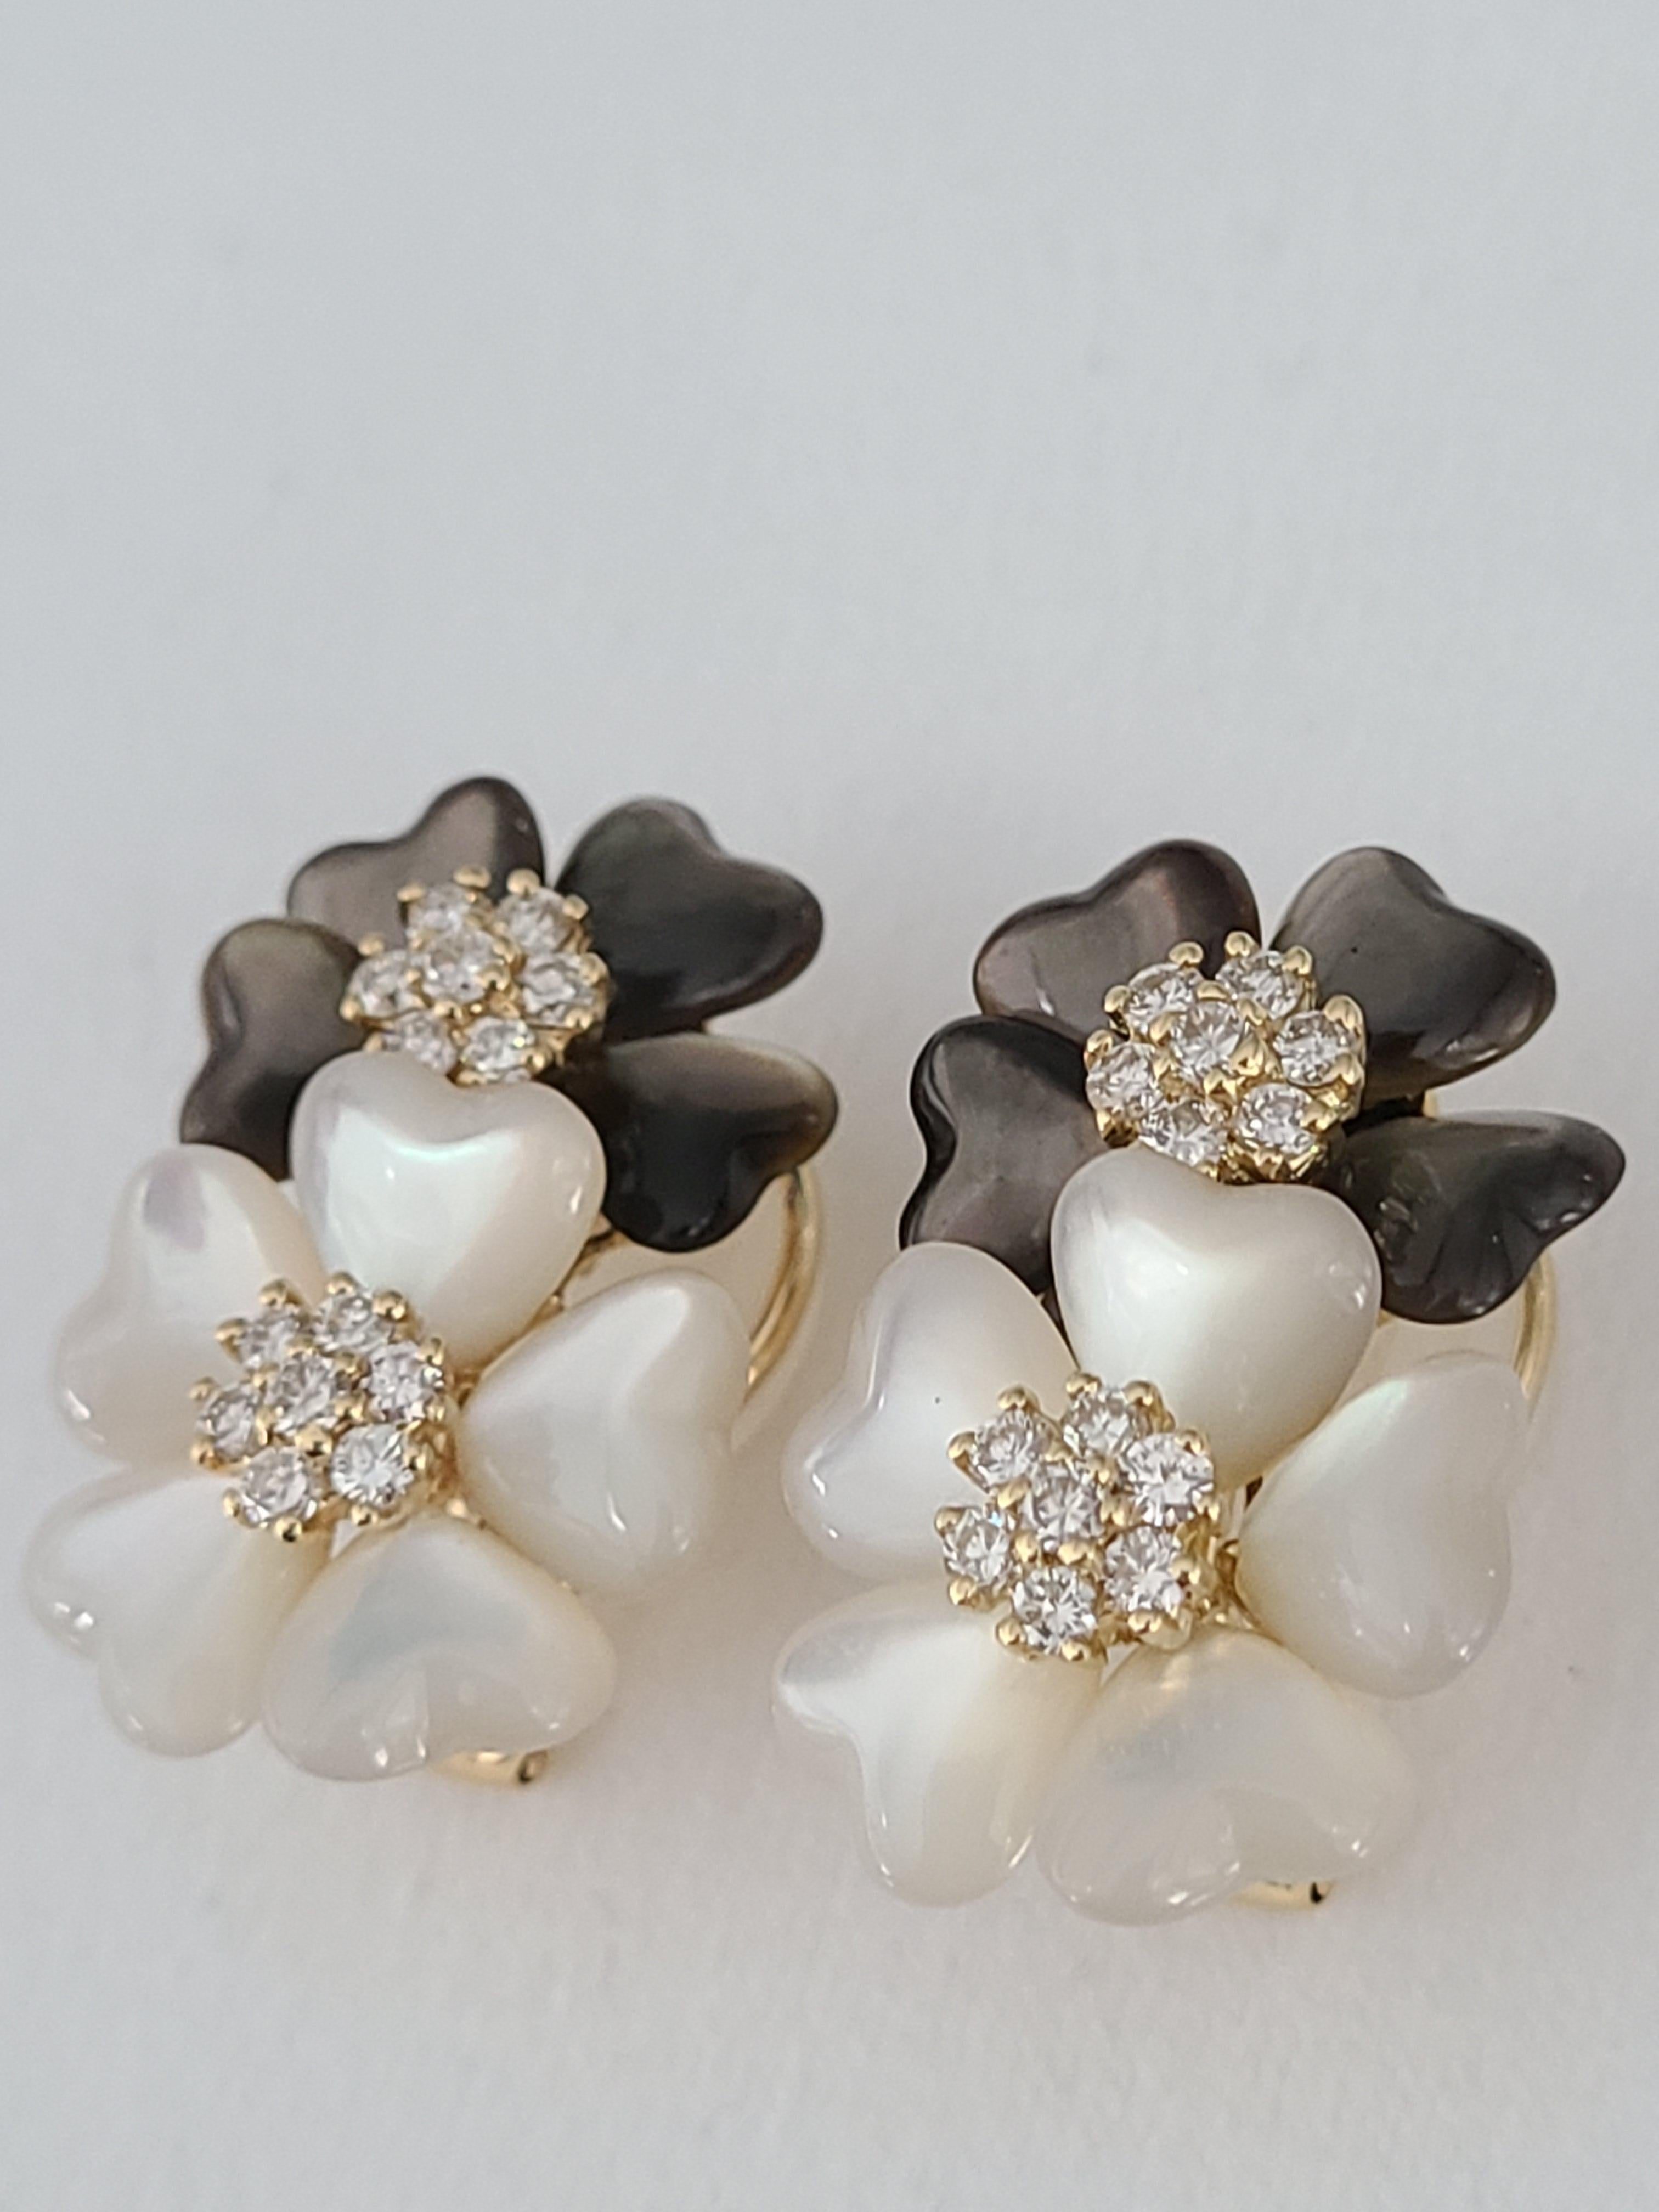 A Beautiful and Gorgeous Shell earrings made in 18k gold with diamonds . Diamond weight in the earrings is .88 carats . Gross weight of the earrings are 13.6 grams. The earrings dimensions in cm 2.5 x 1.5 x .5 (LXWXD). 